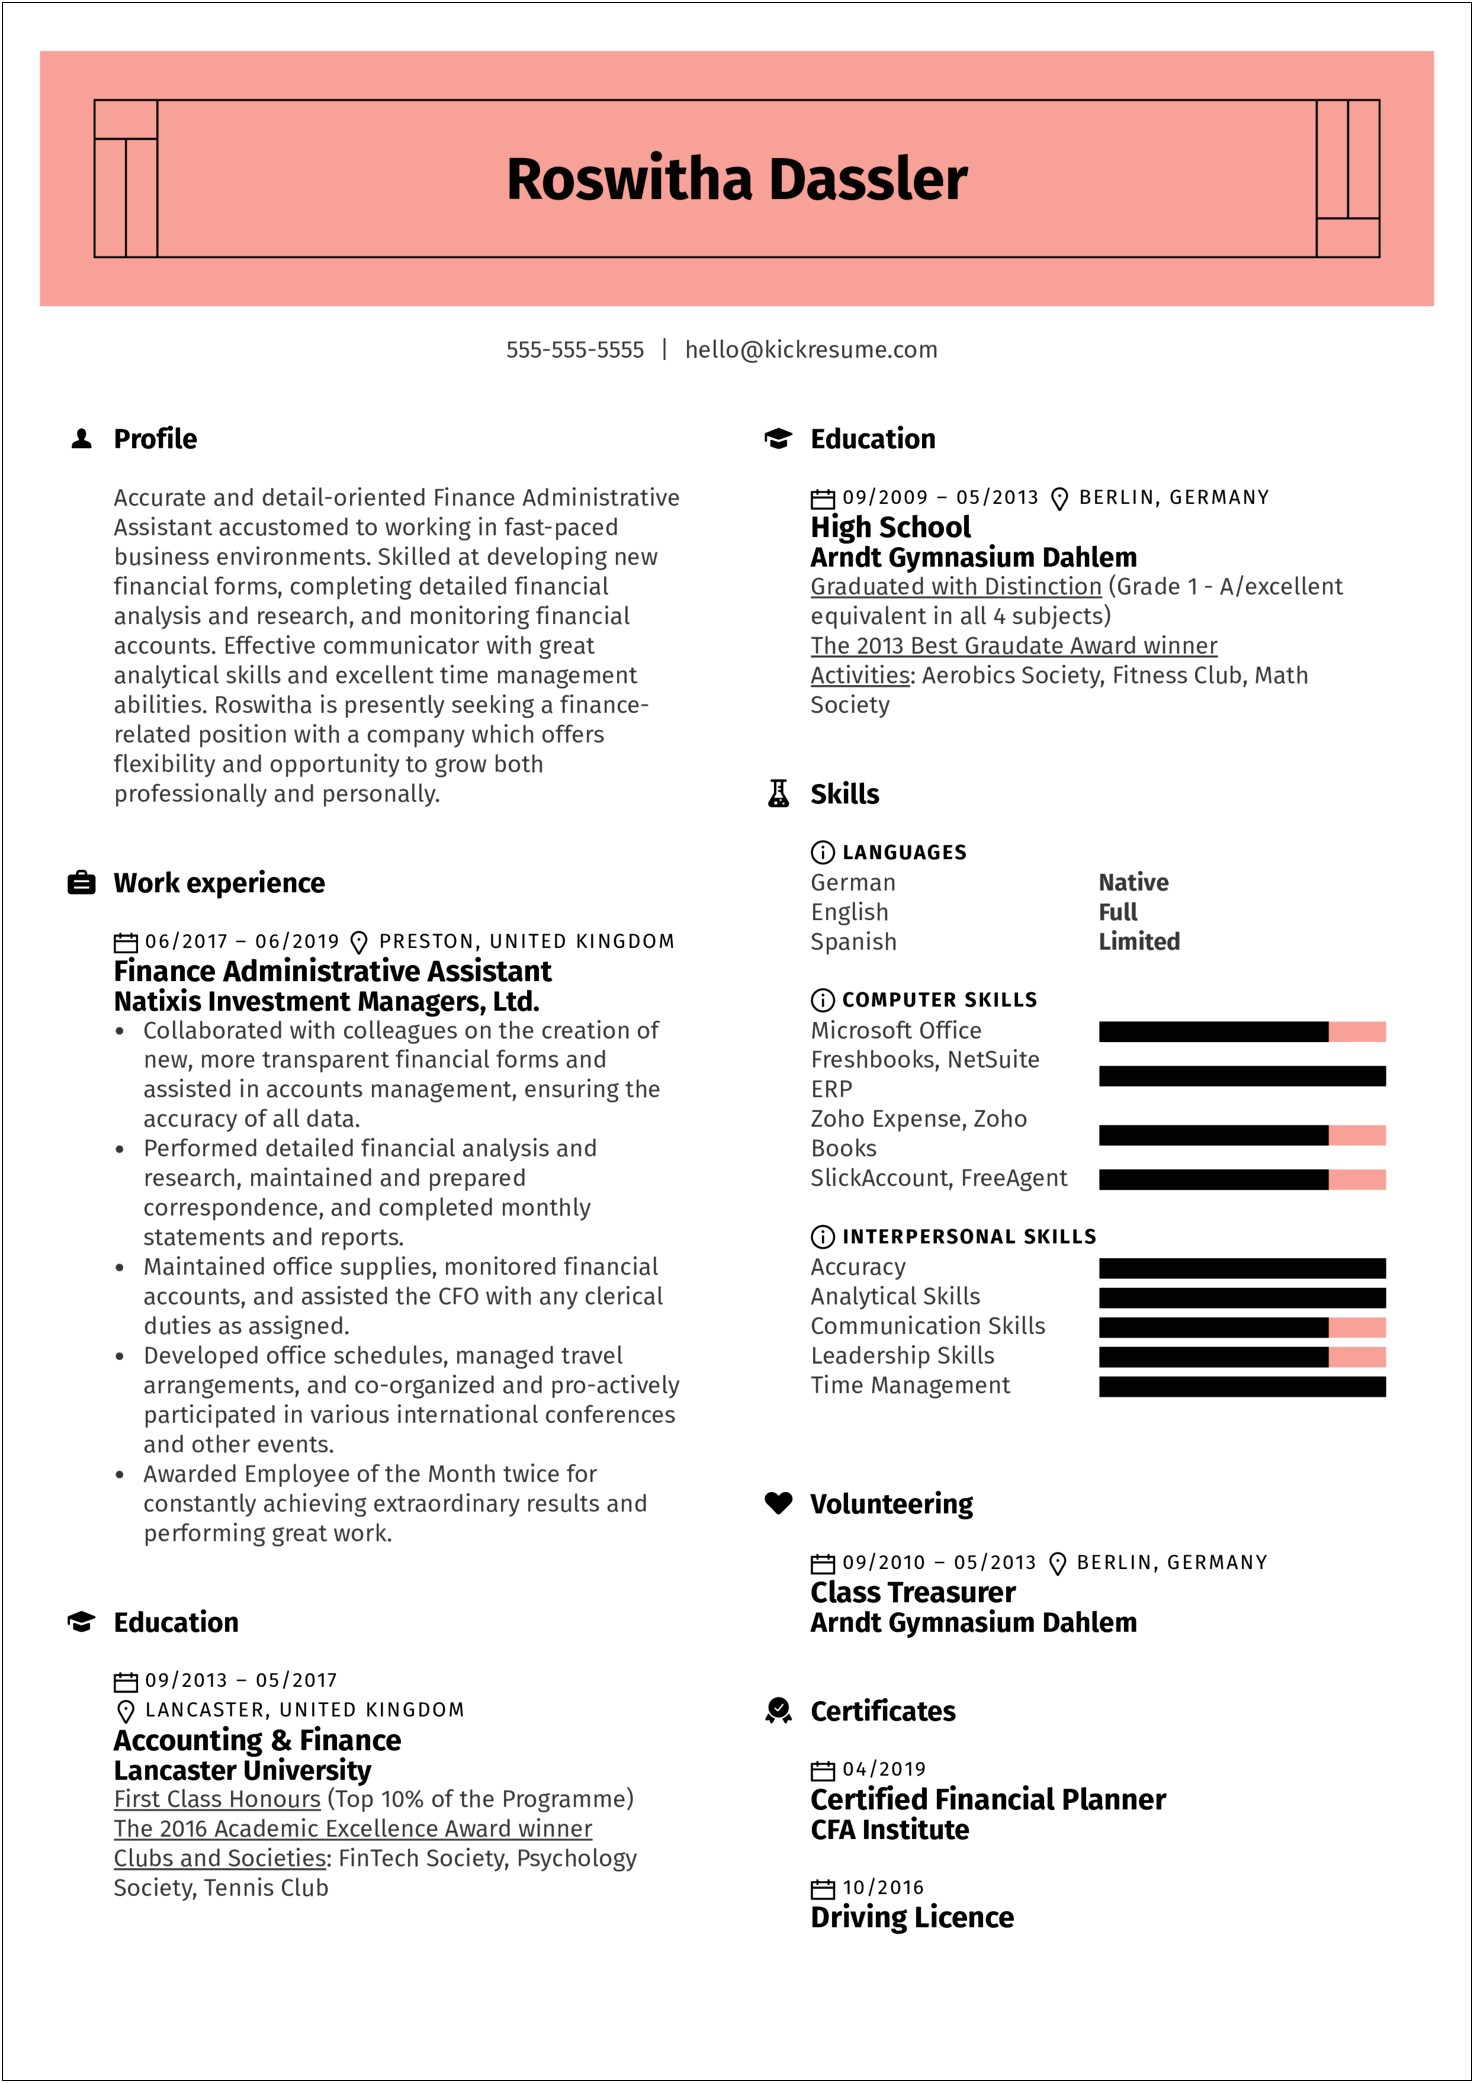 Resume Skills For Office Assistant